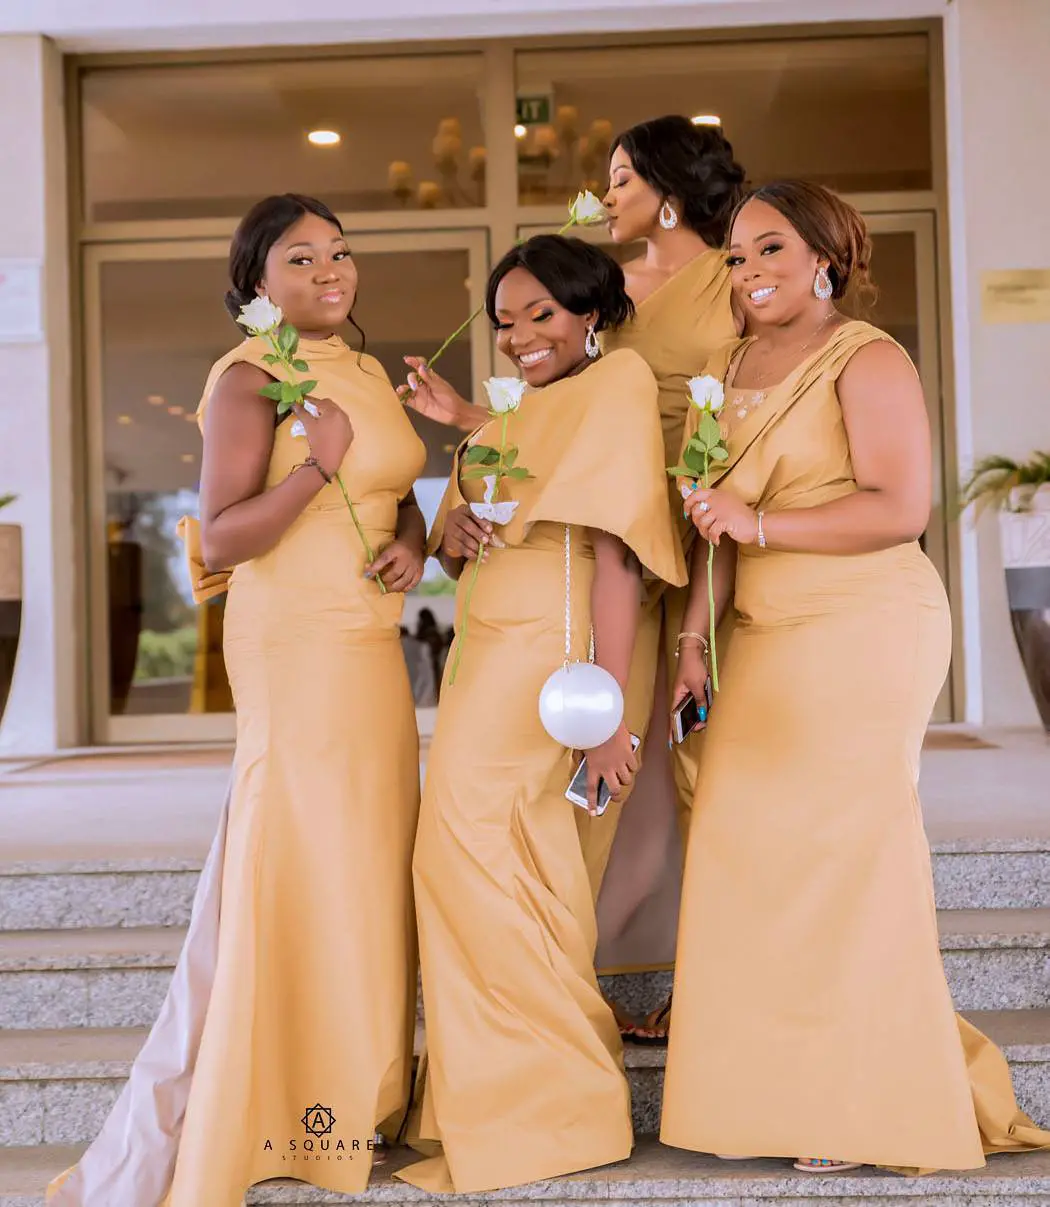  We Are Serving These Sexy Bridesmaids Styles Hot!